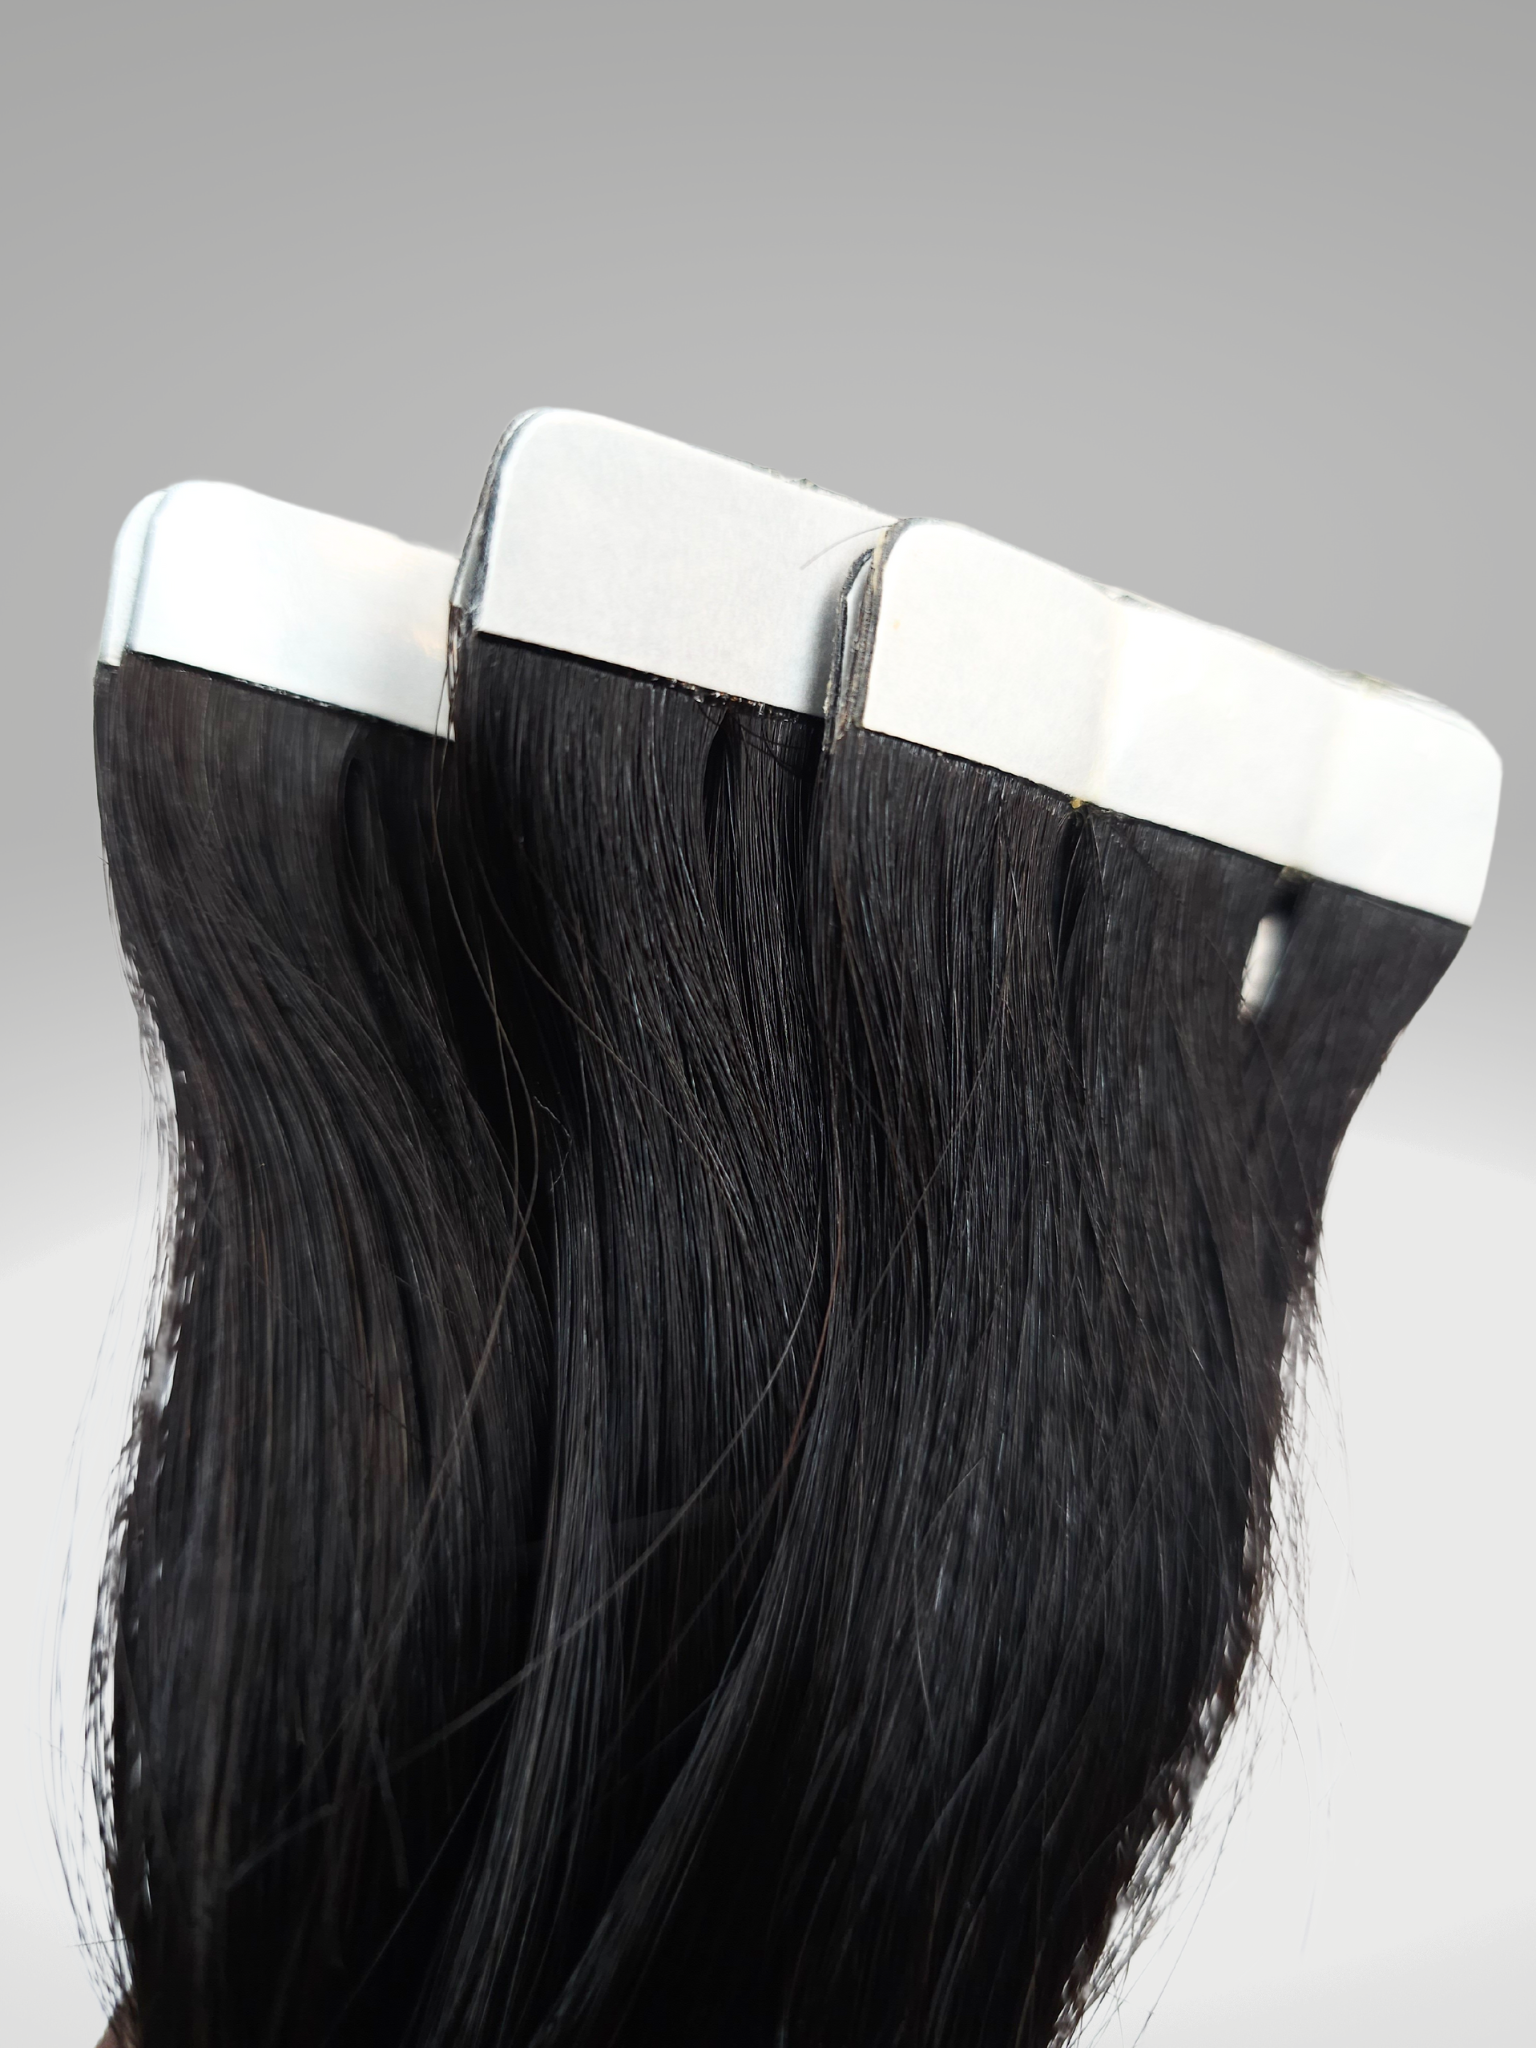 "High-quality Devine Body Wave Tape-in Hair Extensions in various lengths from 16 to 30 inches, showcasing natural wave patterns. Perfect for versatile styling and coloring to match personal fashion preferences.